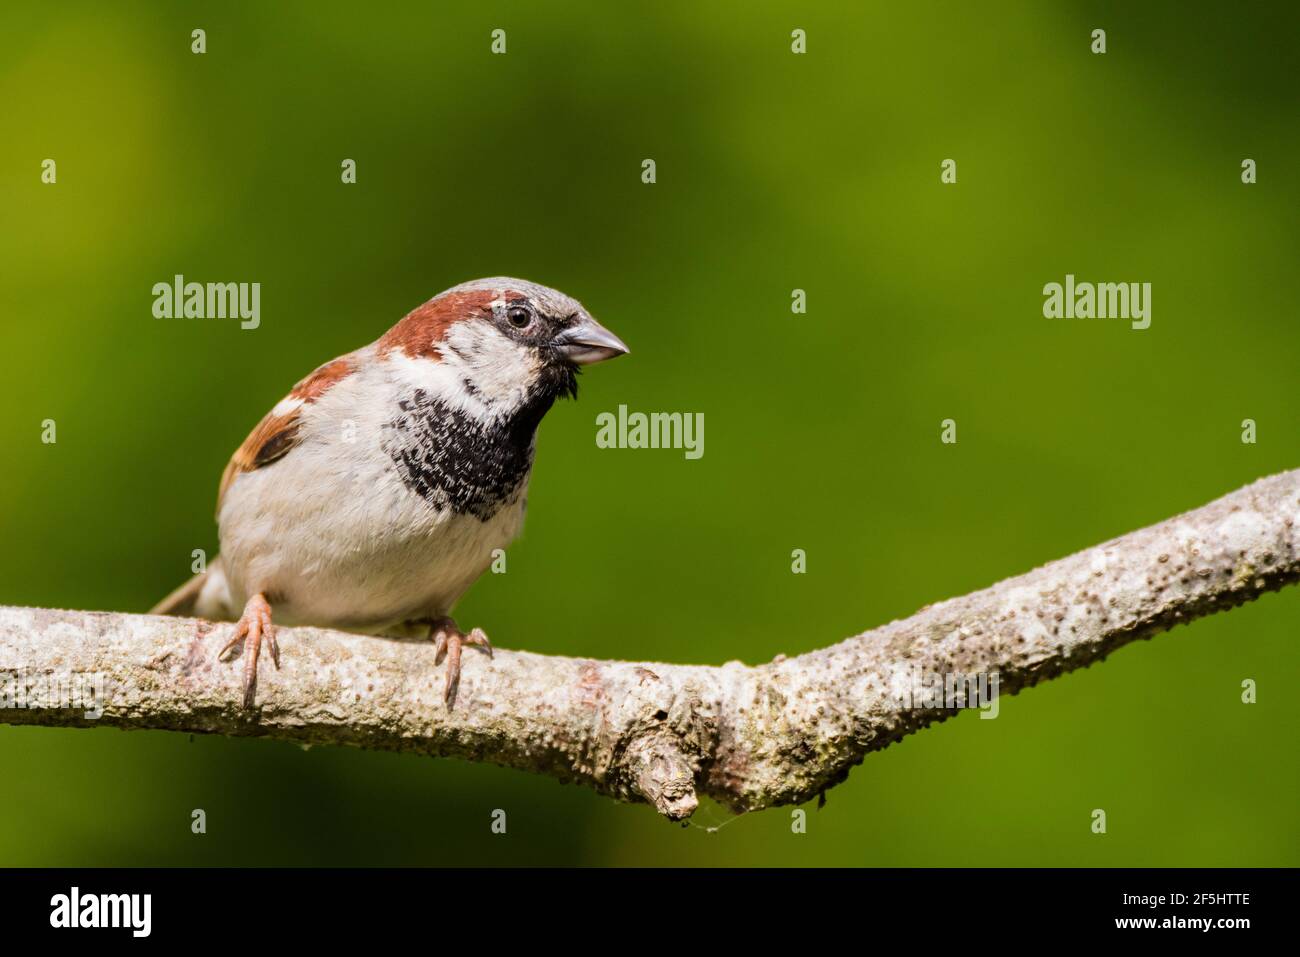 A close up portrait of a male house sparrow (passer domesticus) with a diffuse green background taken in a uk garden Stock Photo